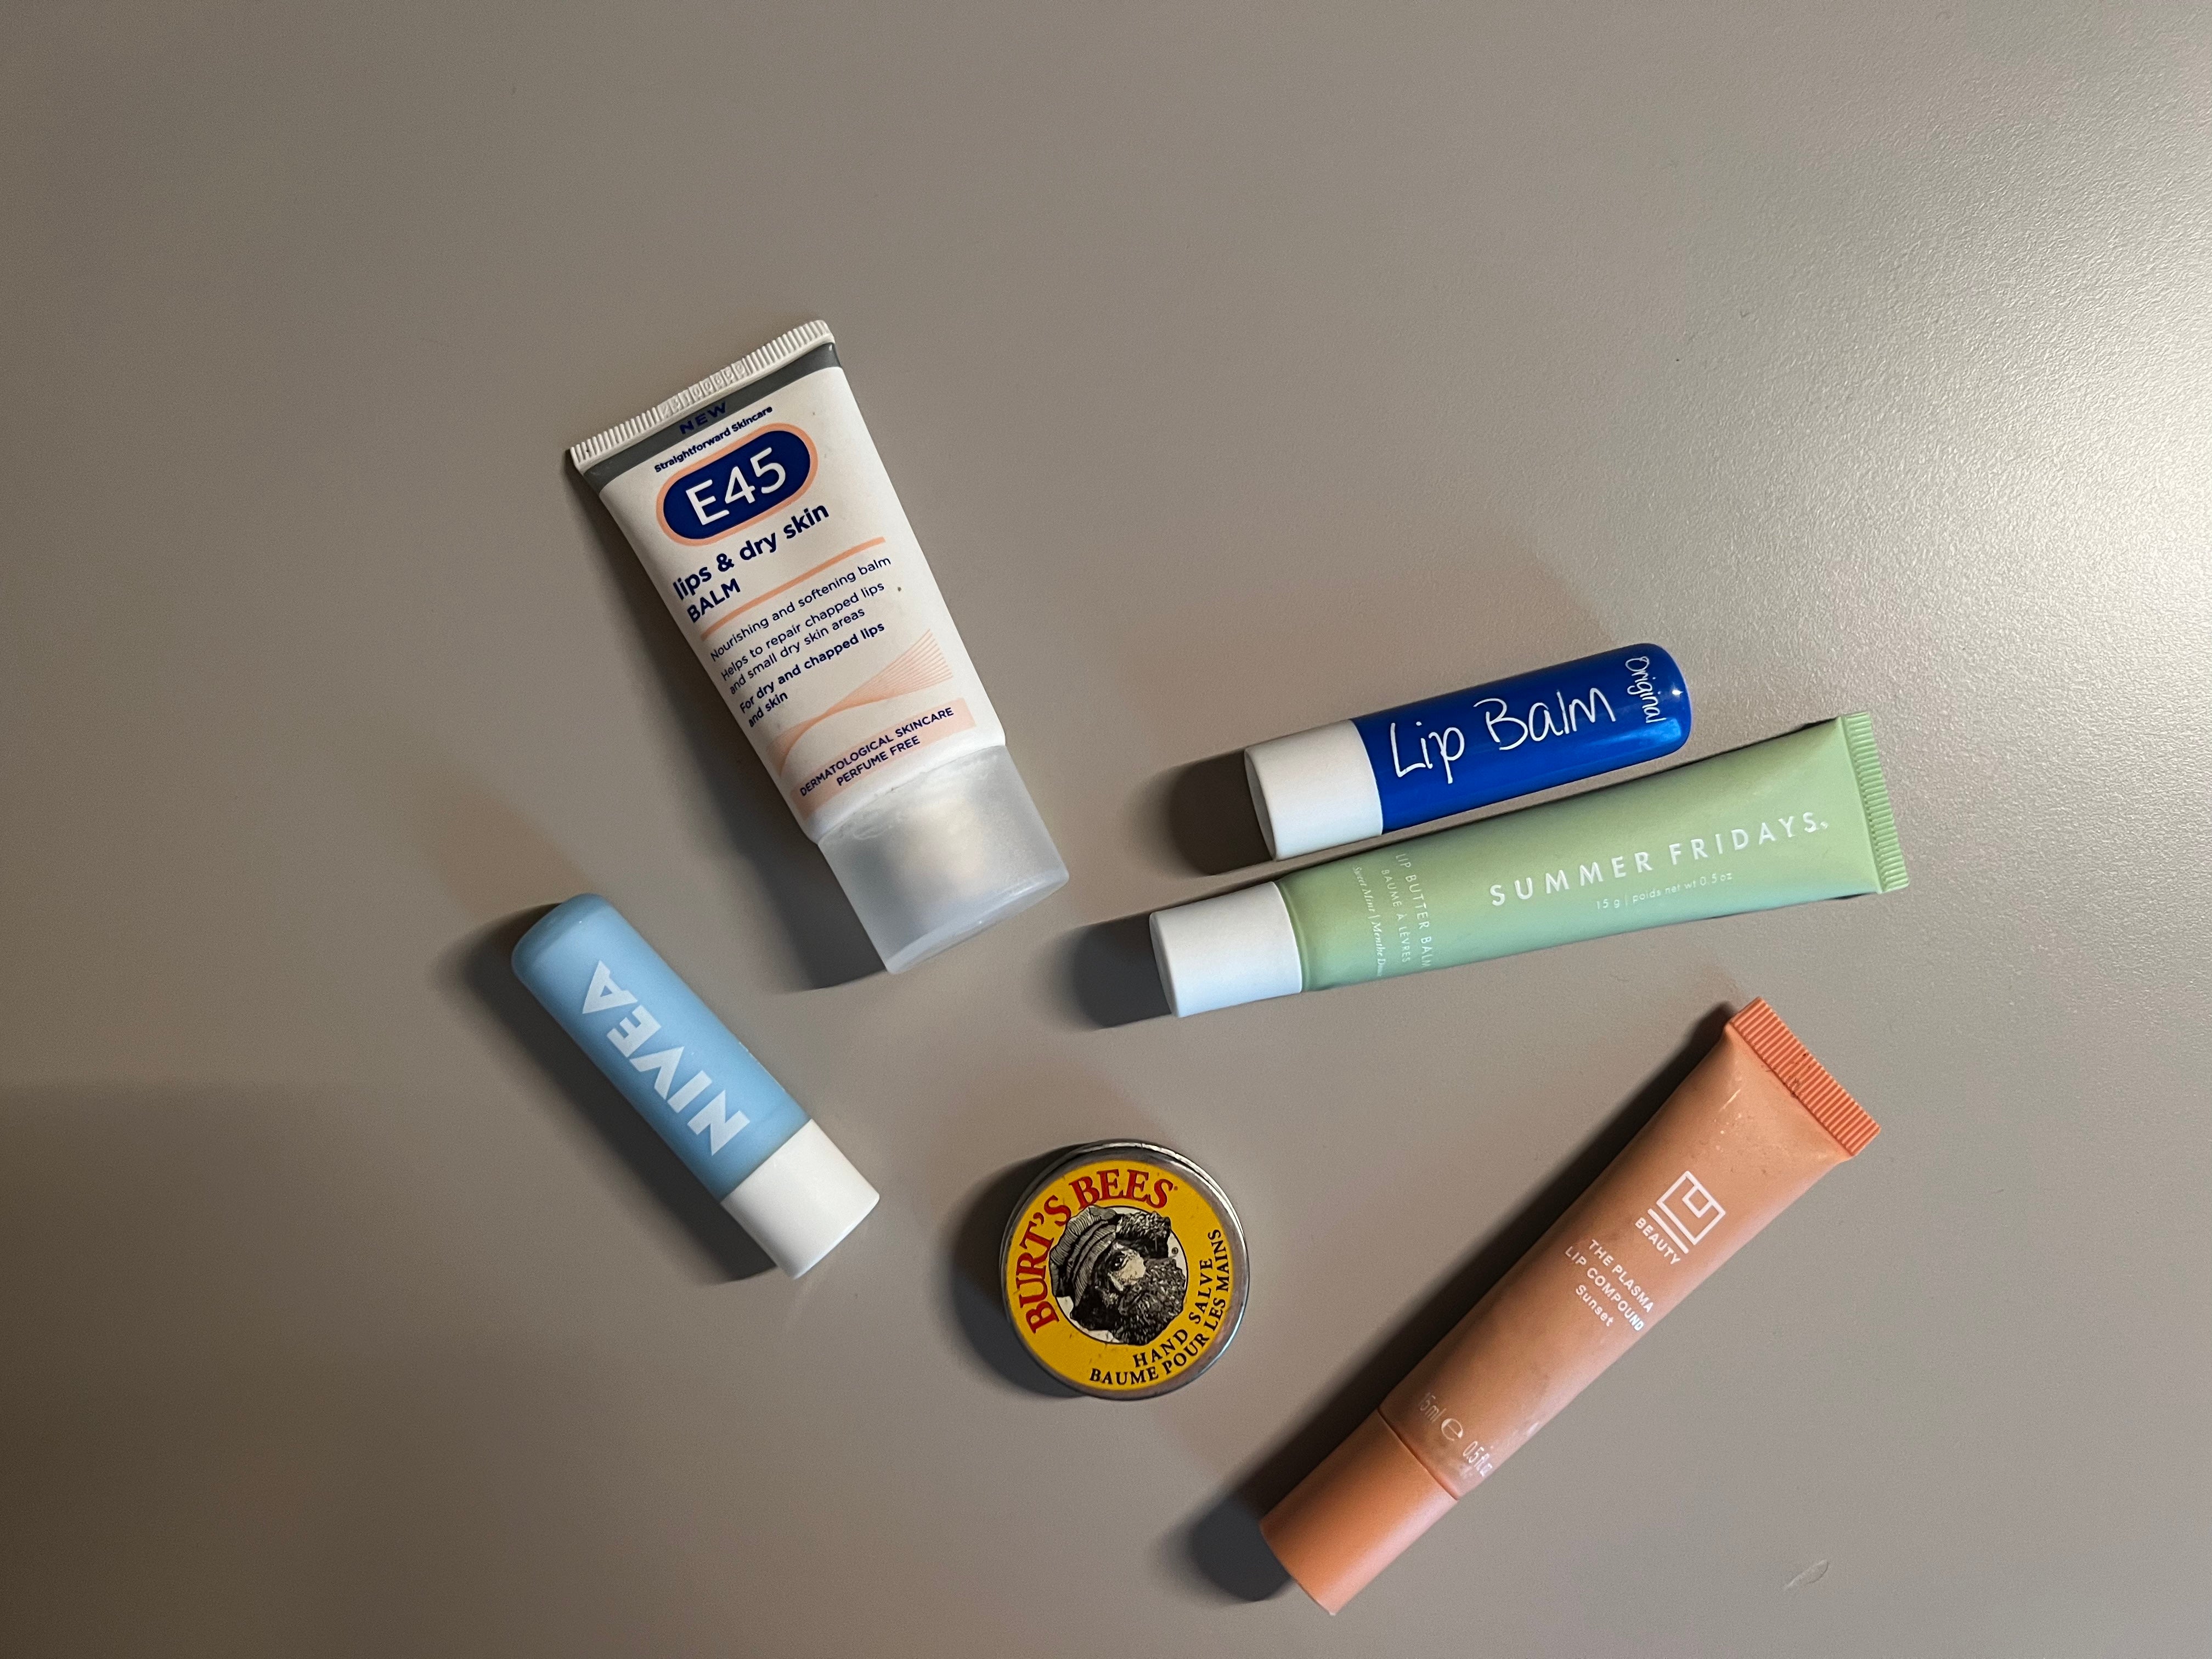 A selection of the best lip balms that I love